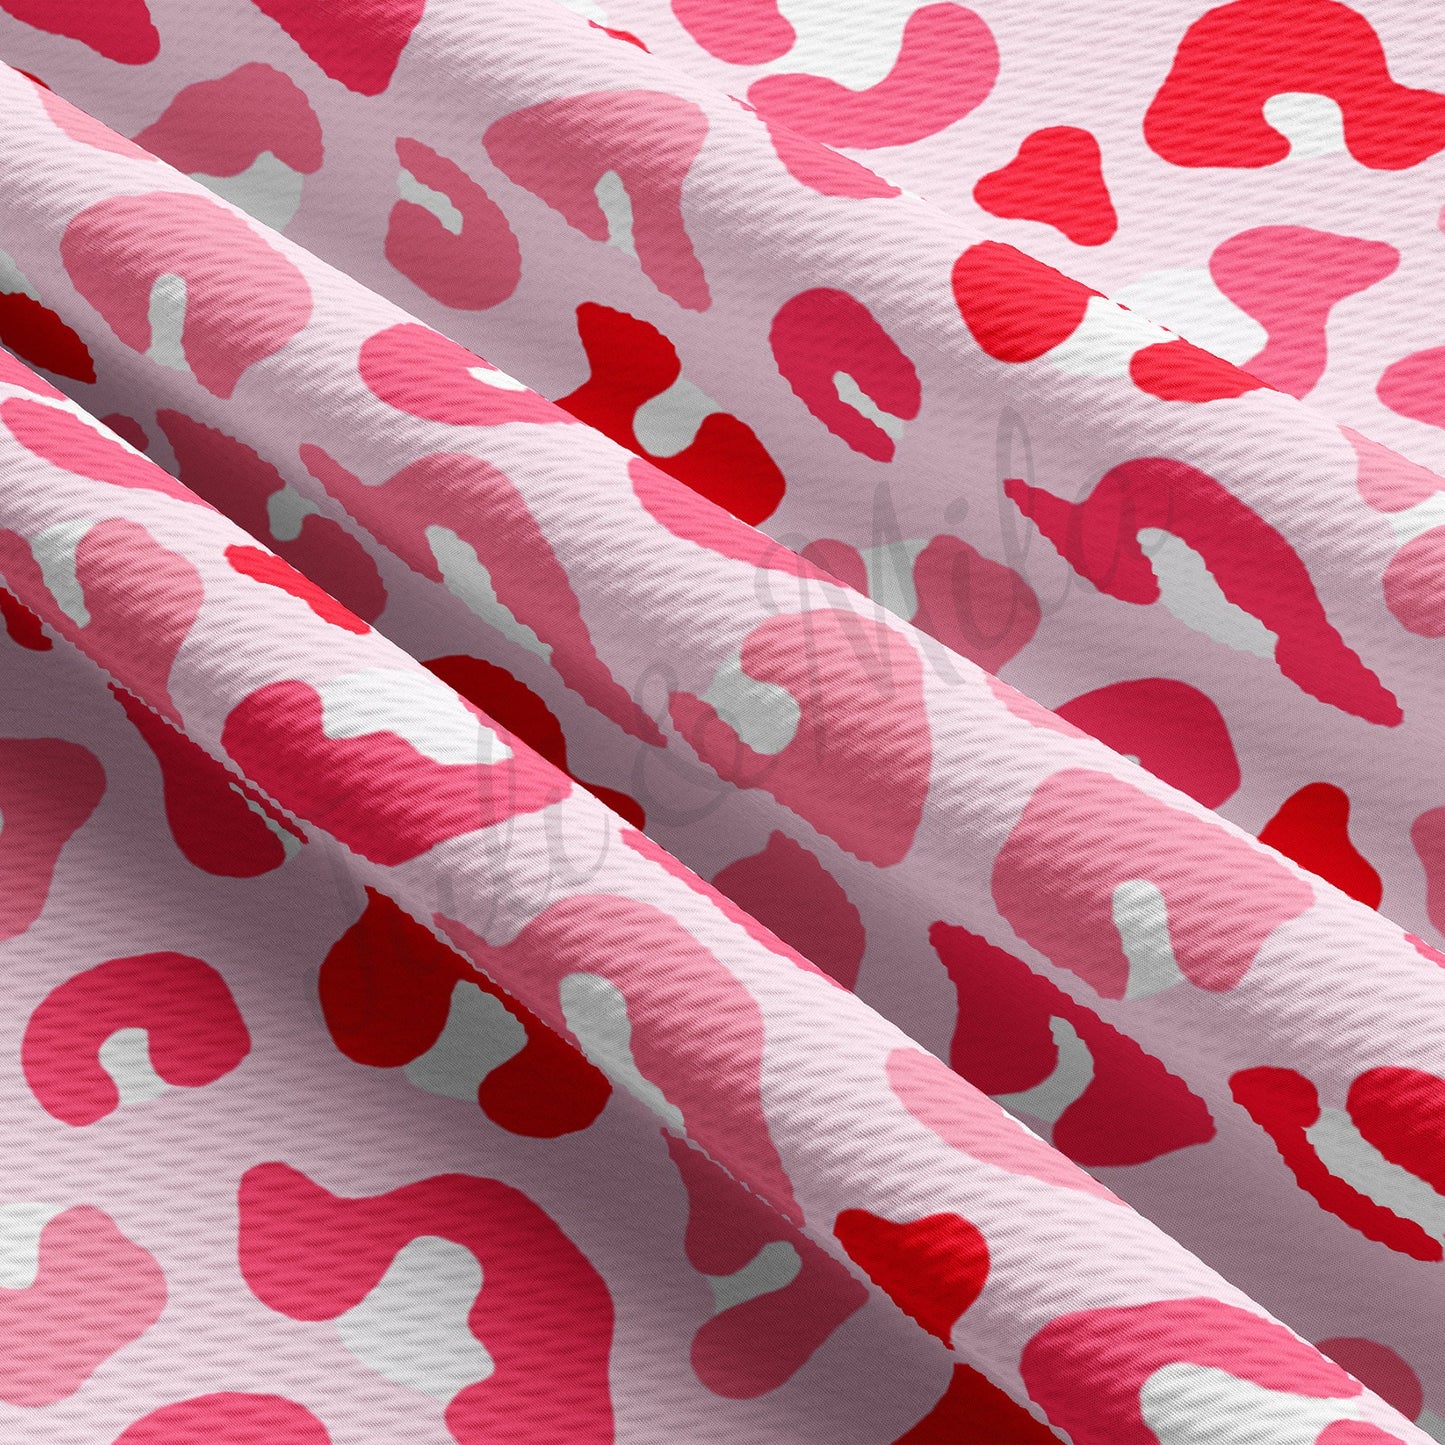 Valentines Day Bullet Textured Fabric AA1188